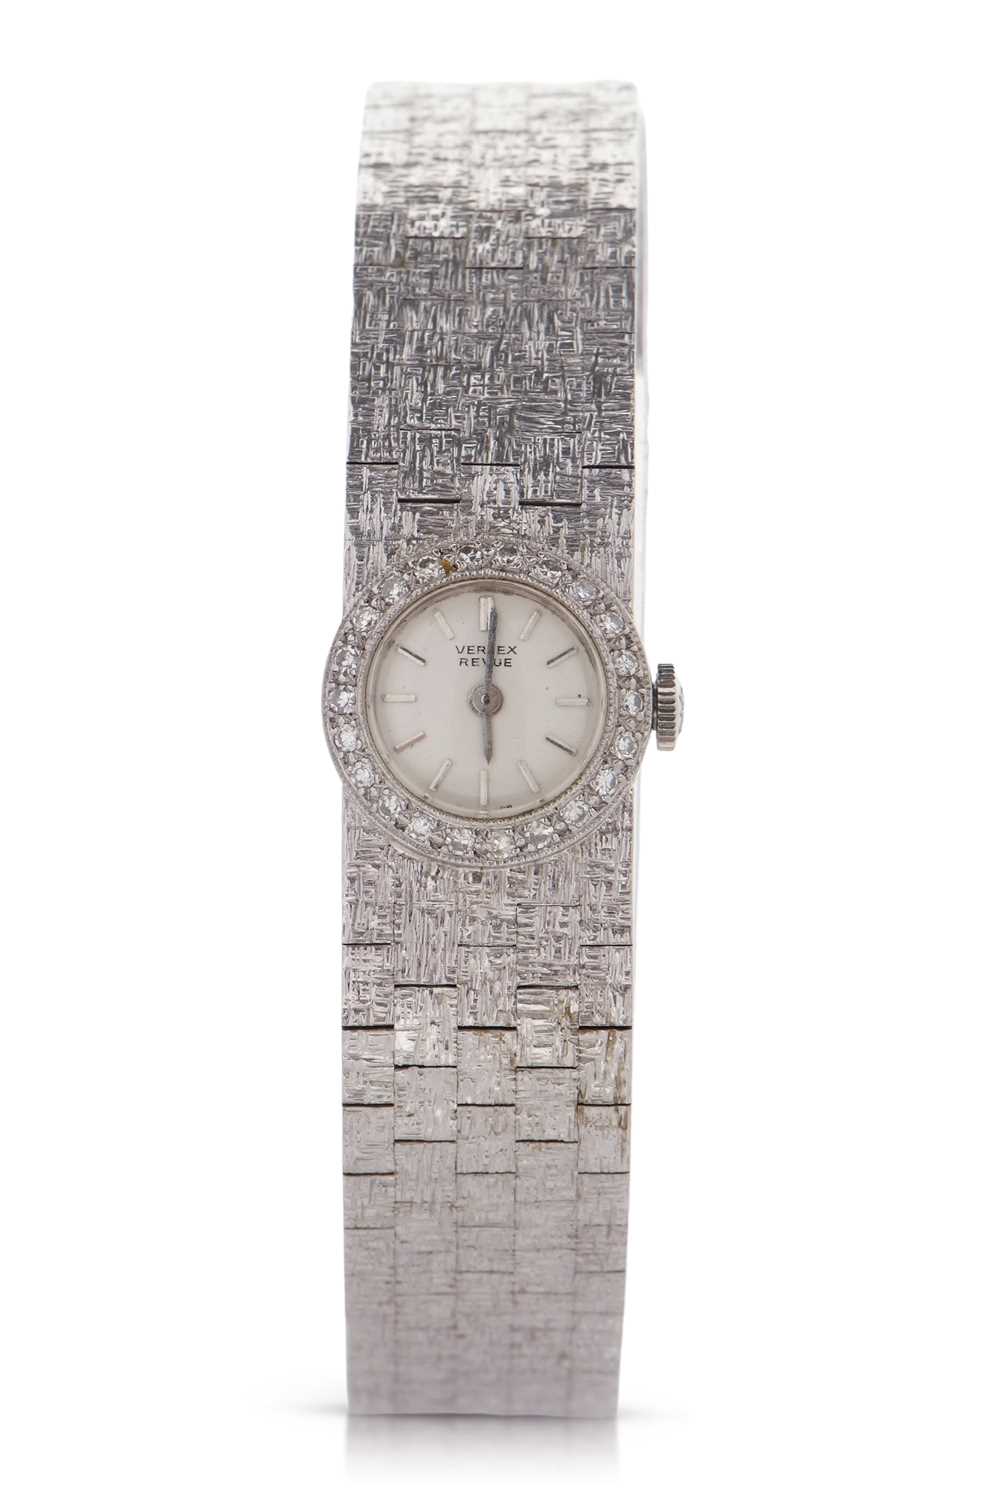 An 18ct white gold ladies Vertex wristwatch with diamond bezel, hallmarks for gold can be found on